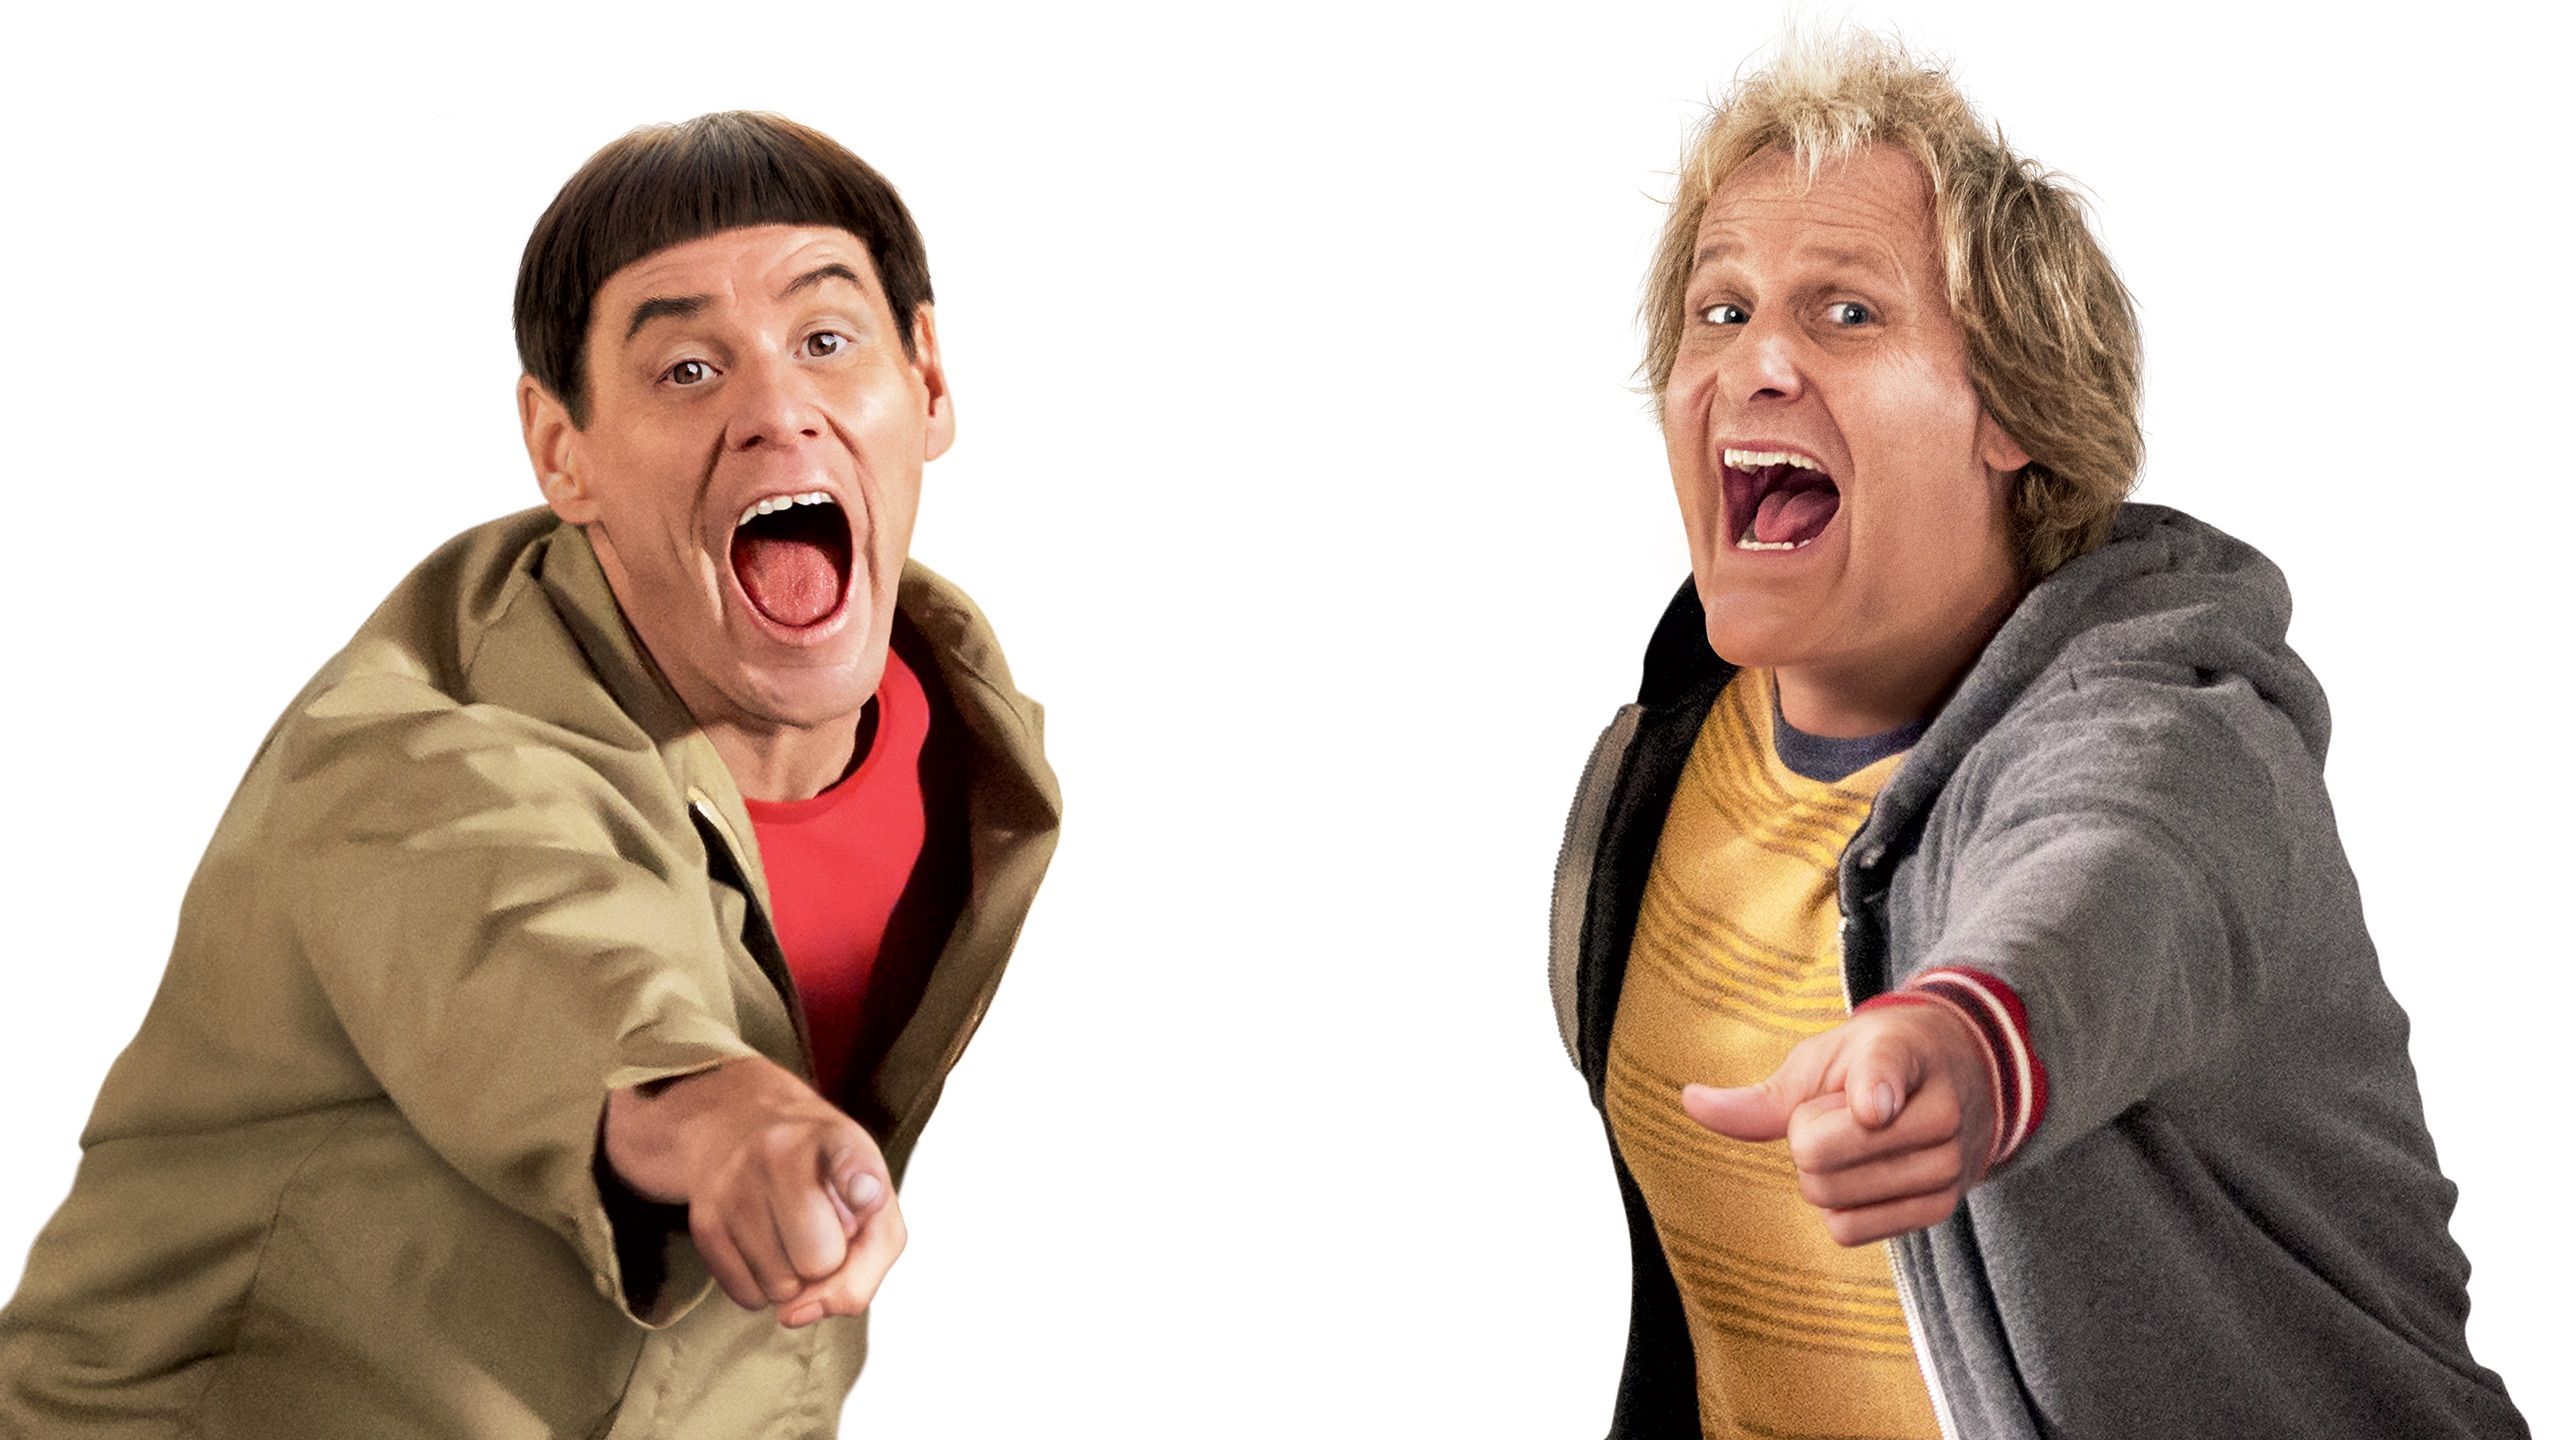 dumb and dumber full movie download